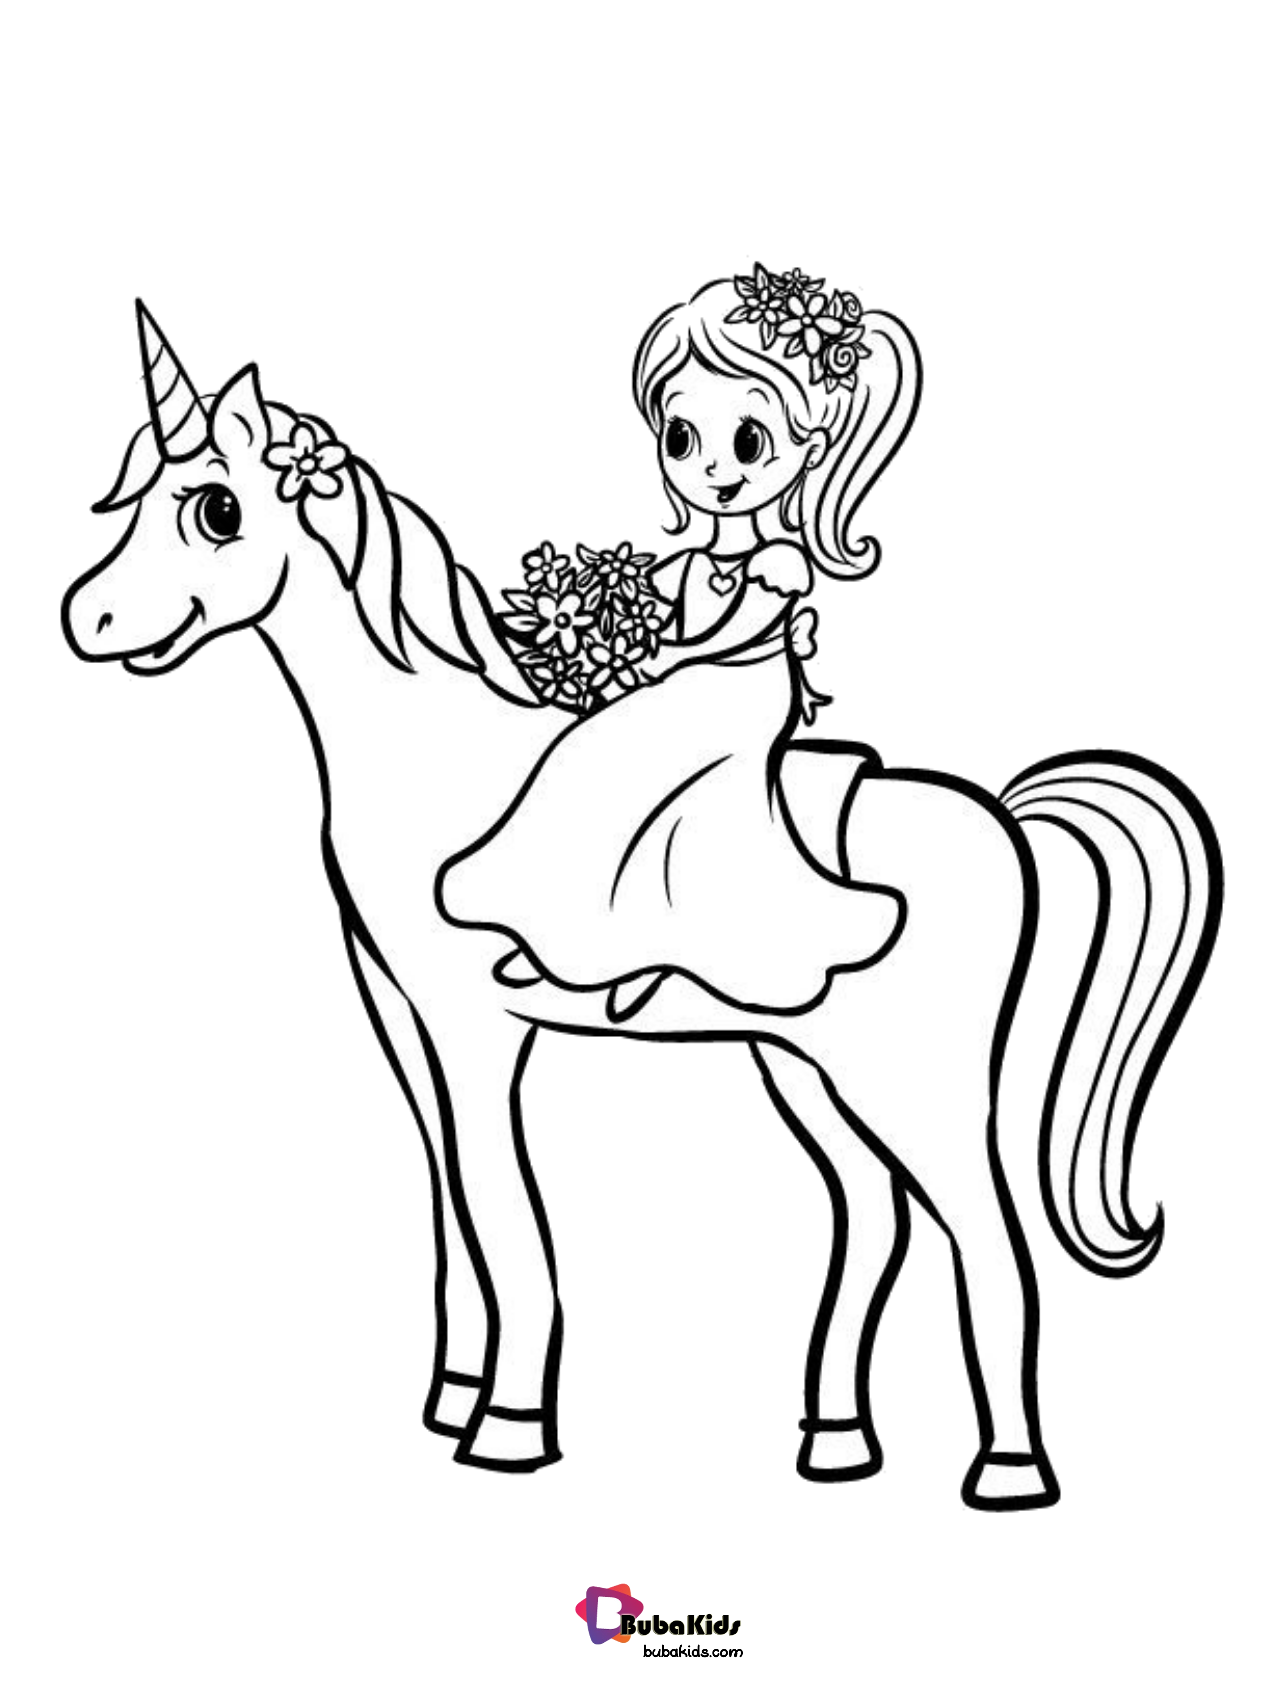 Unicorn Coloring Sheets For Girls Wallpaper